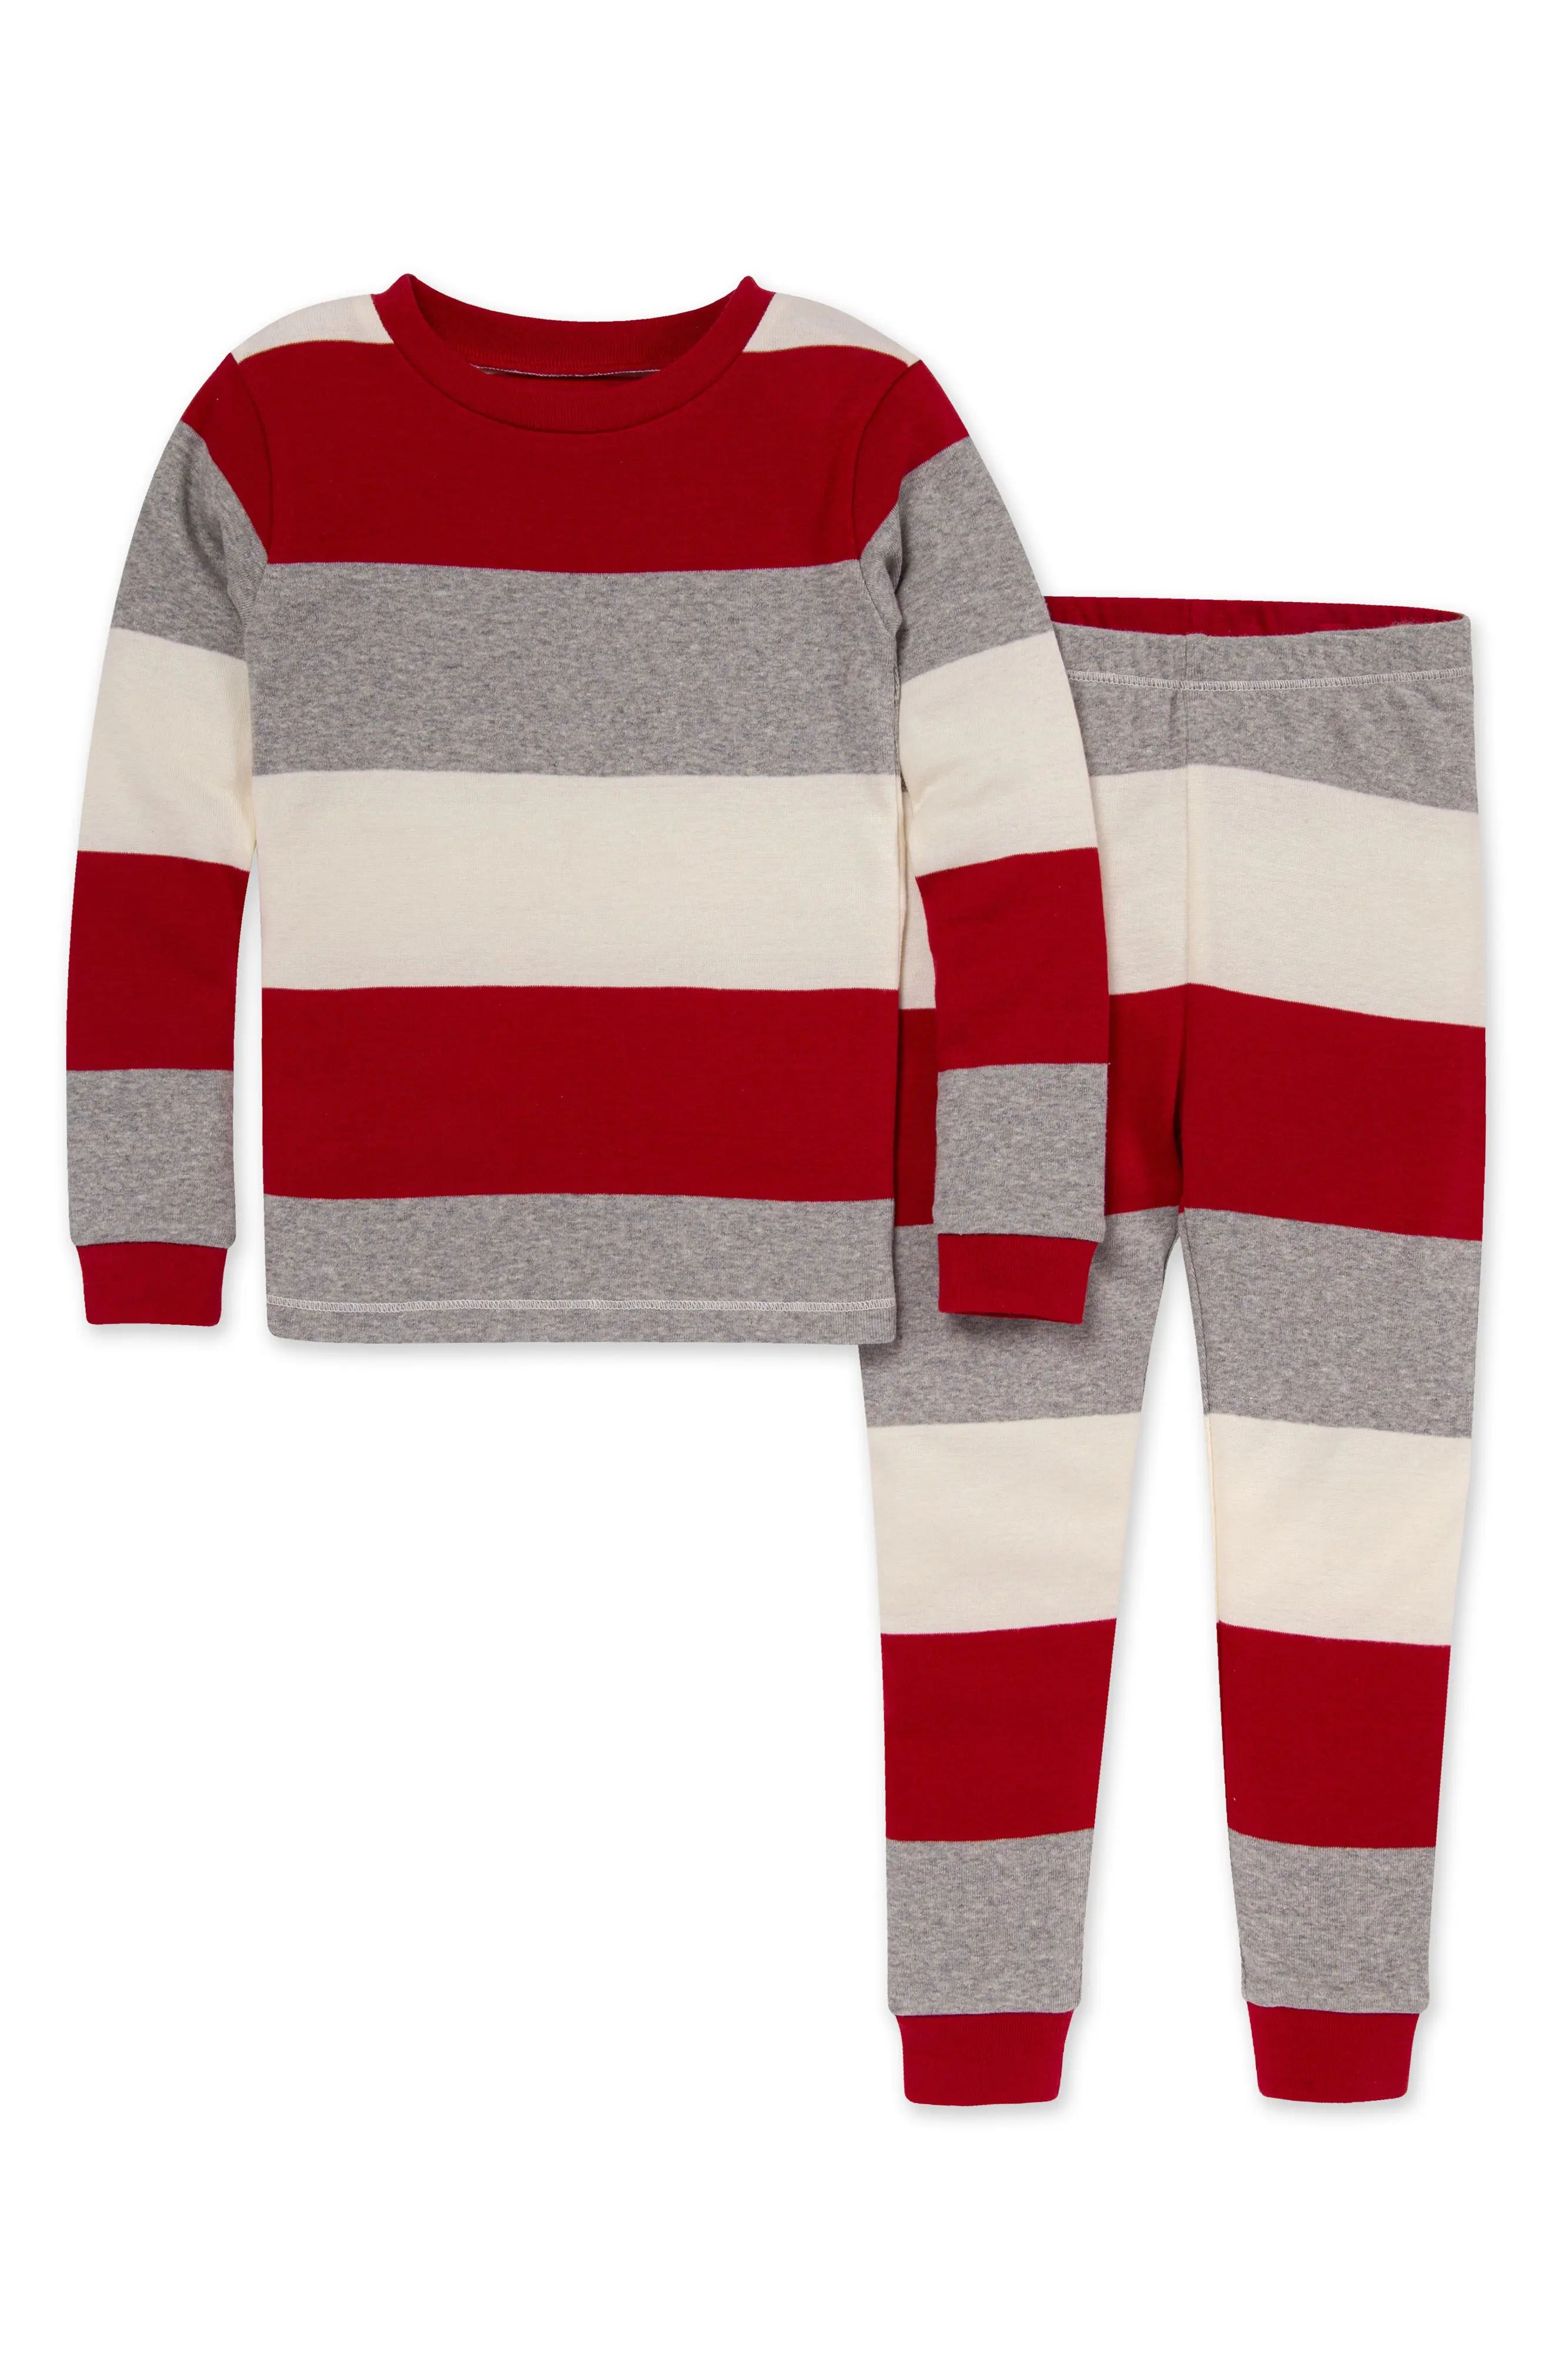 Burt's Bees Kids' Stripe Fitted Two-Piece Organic Cotton Pajamas, Size 5Y in Cardinal at Nordstrom | Nordstrom